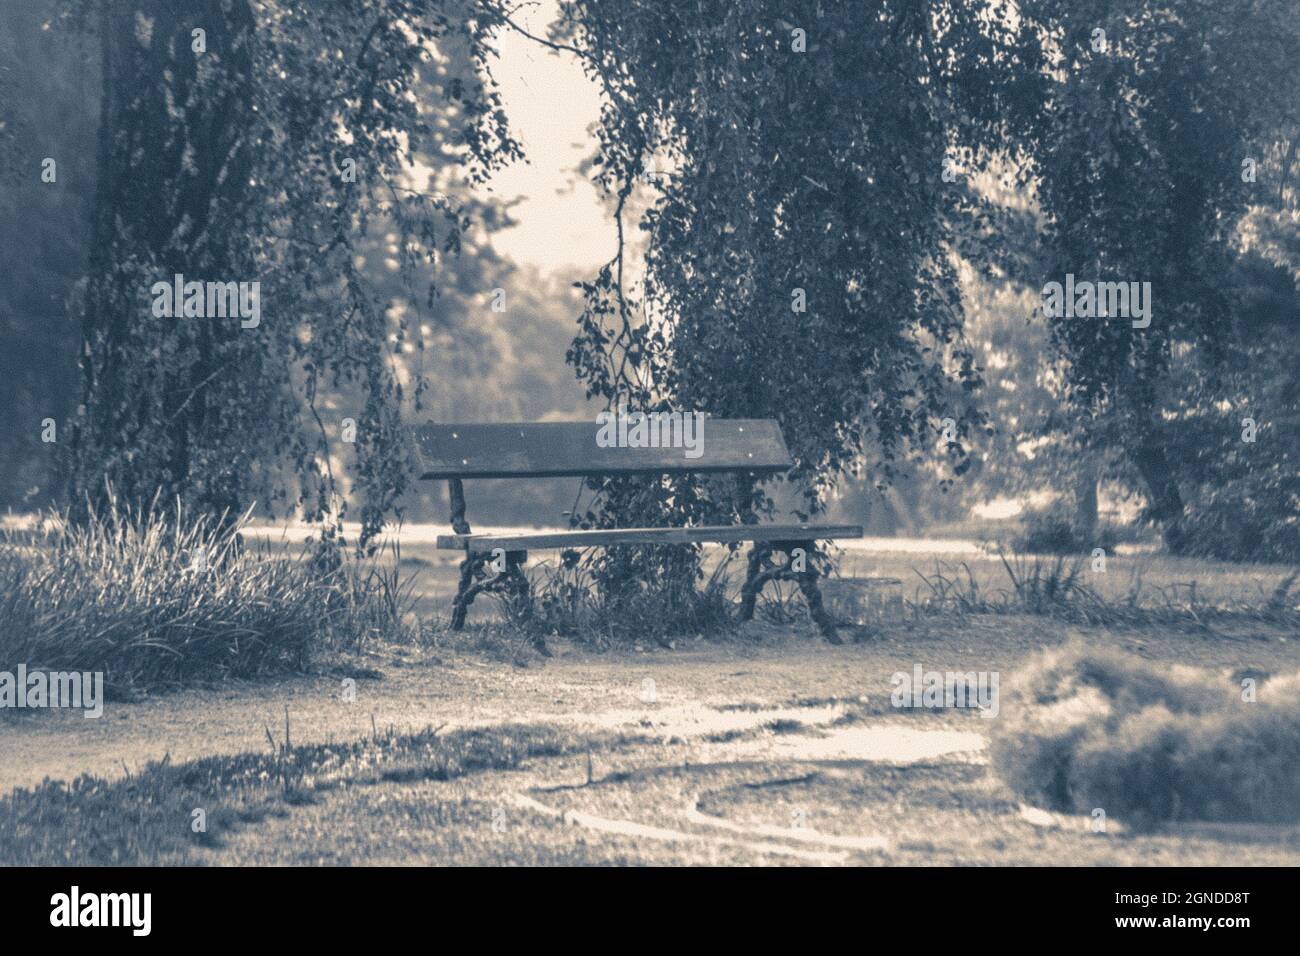 Old vintage photo. Park bench sunny day summer Stock Photo